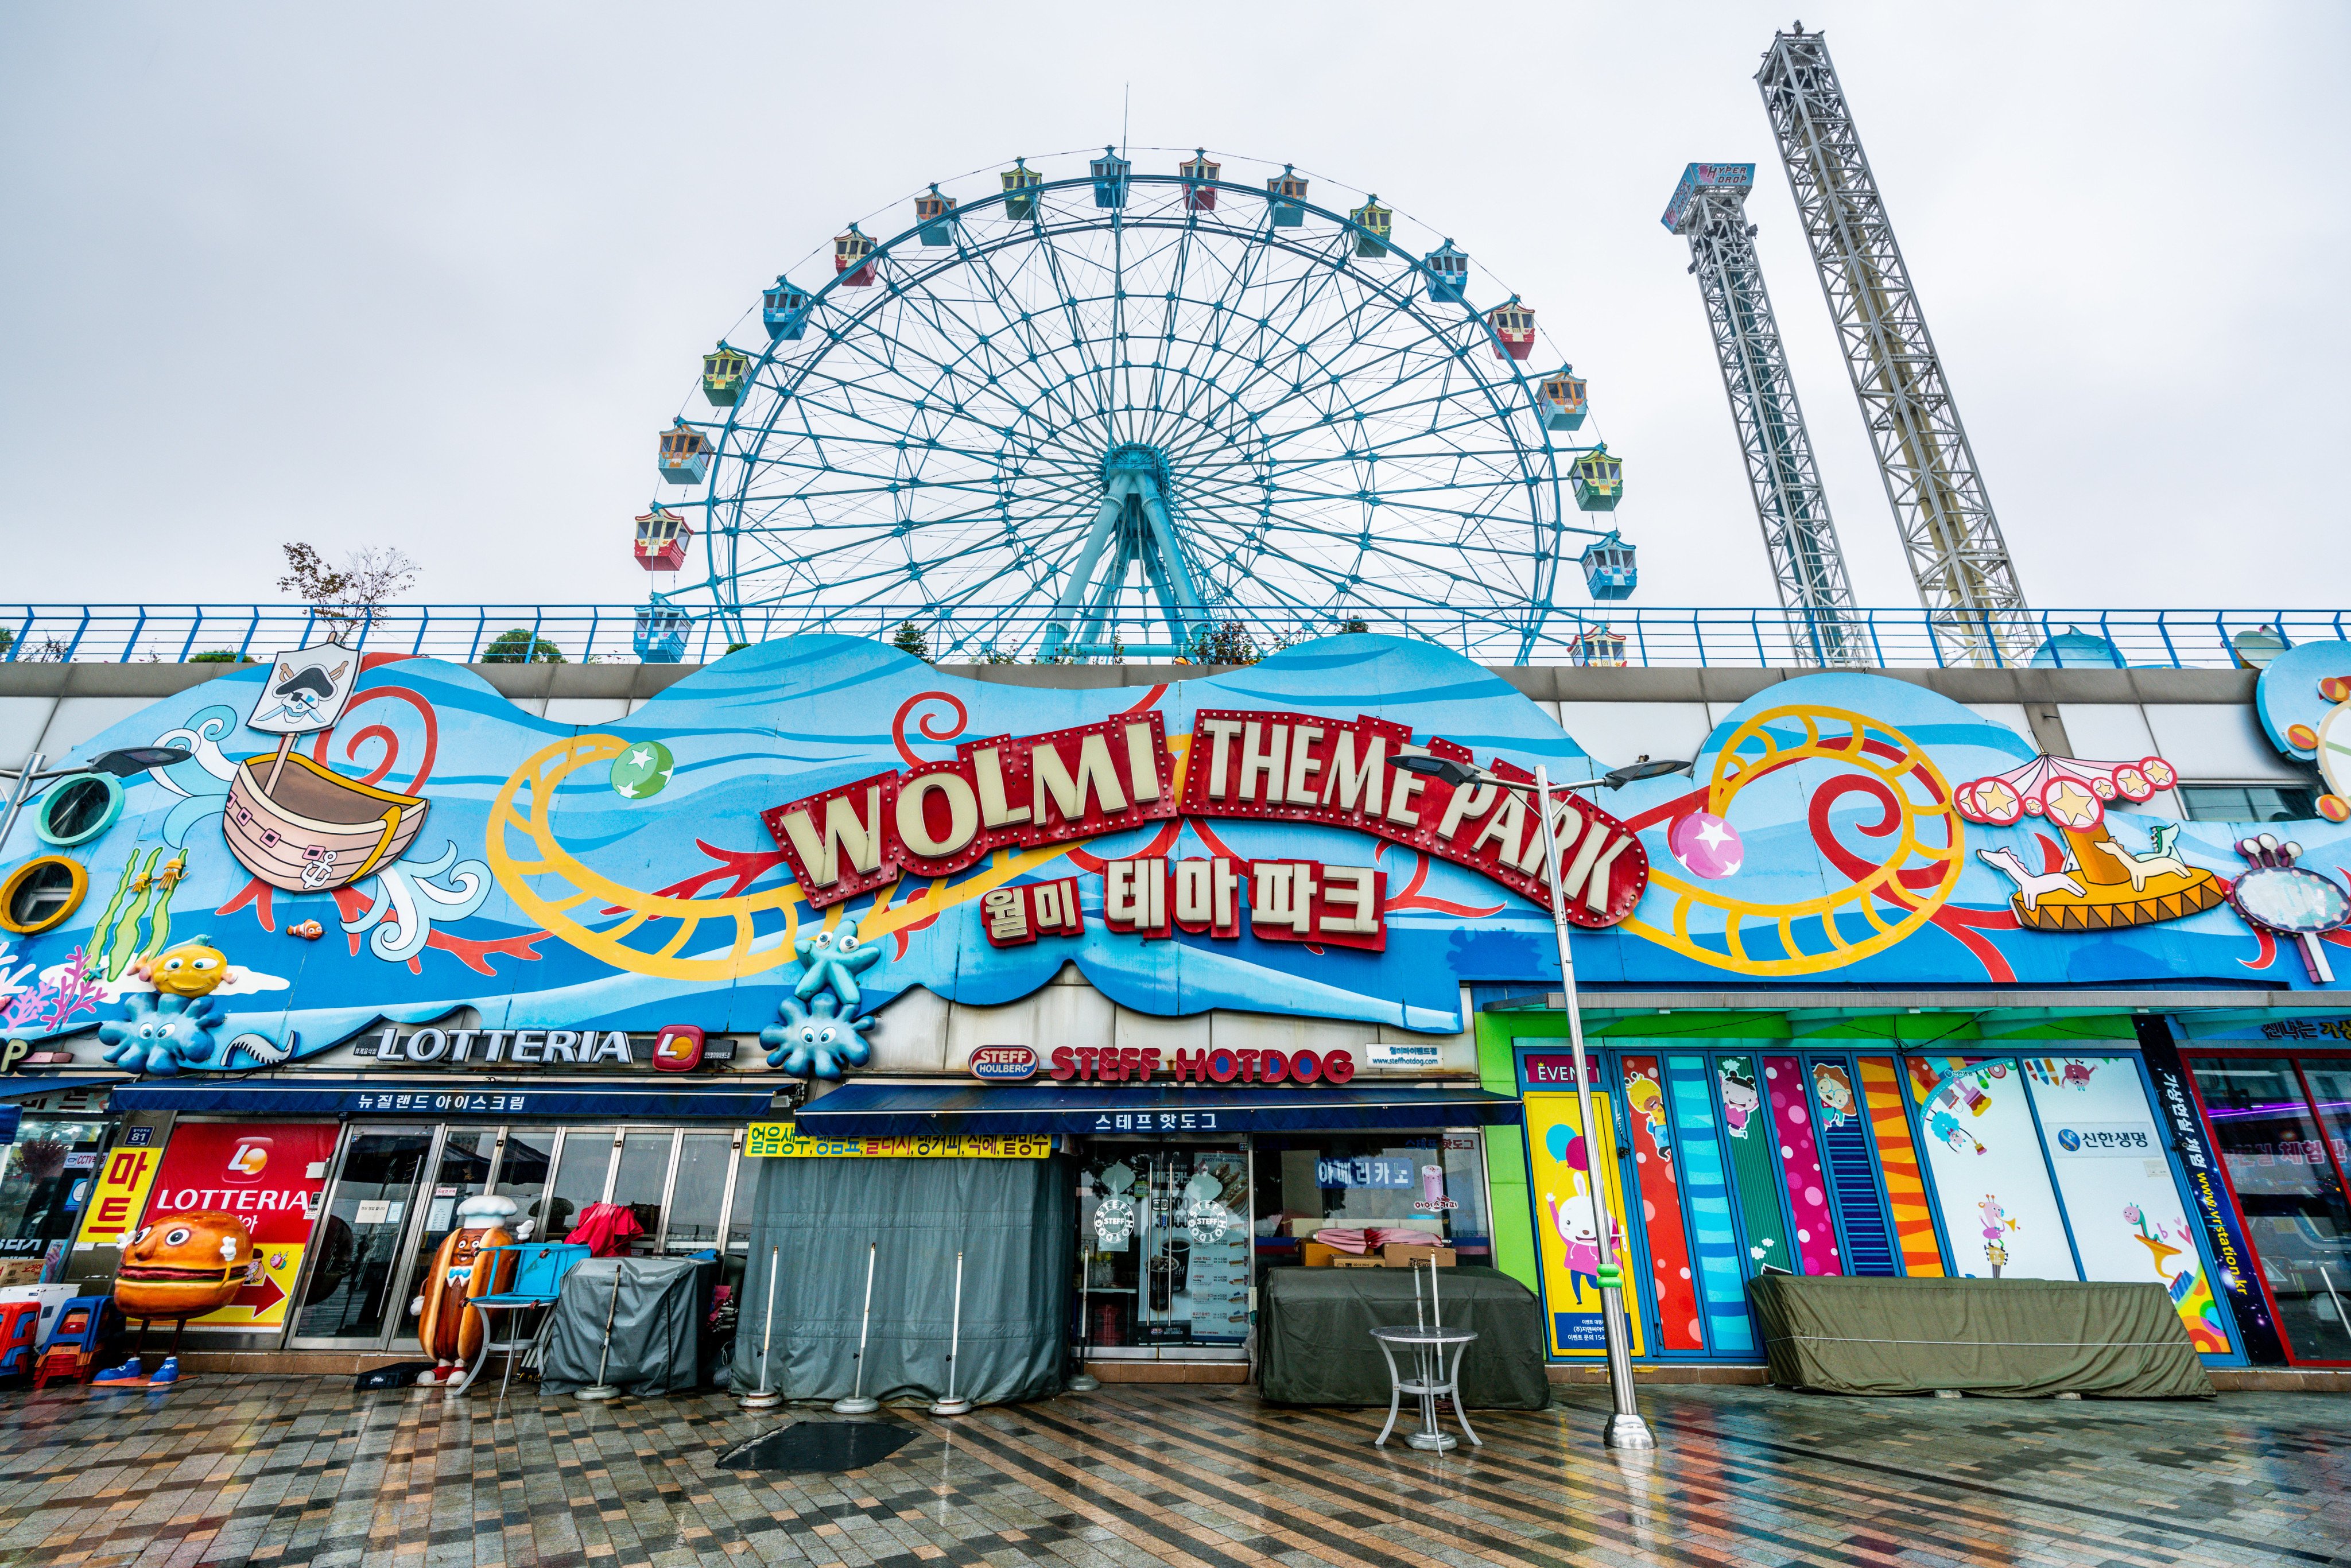 Incheon South Korea , 7 October 2019 : Wolmi theme park entrance with view of the ferris wheel on wolmido island in Incheon South Korea&#xA;&#xA;CREDIT: Shutterstock